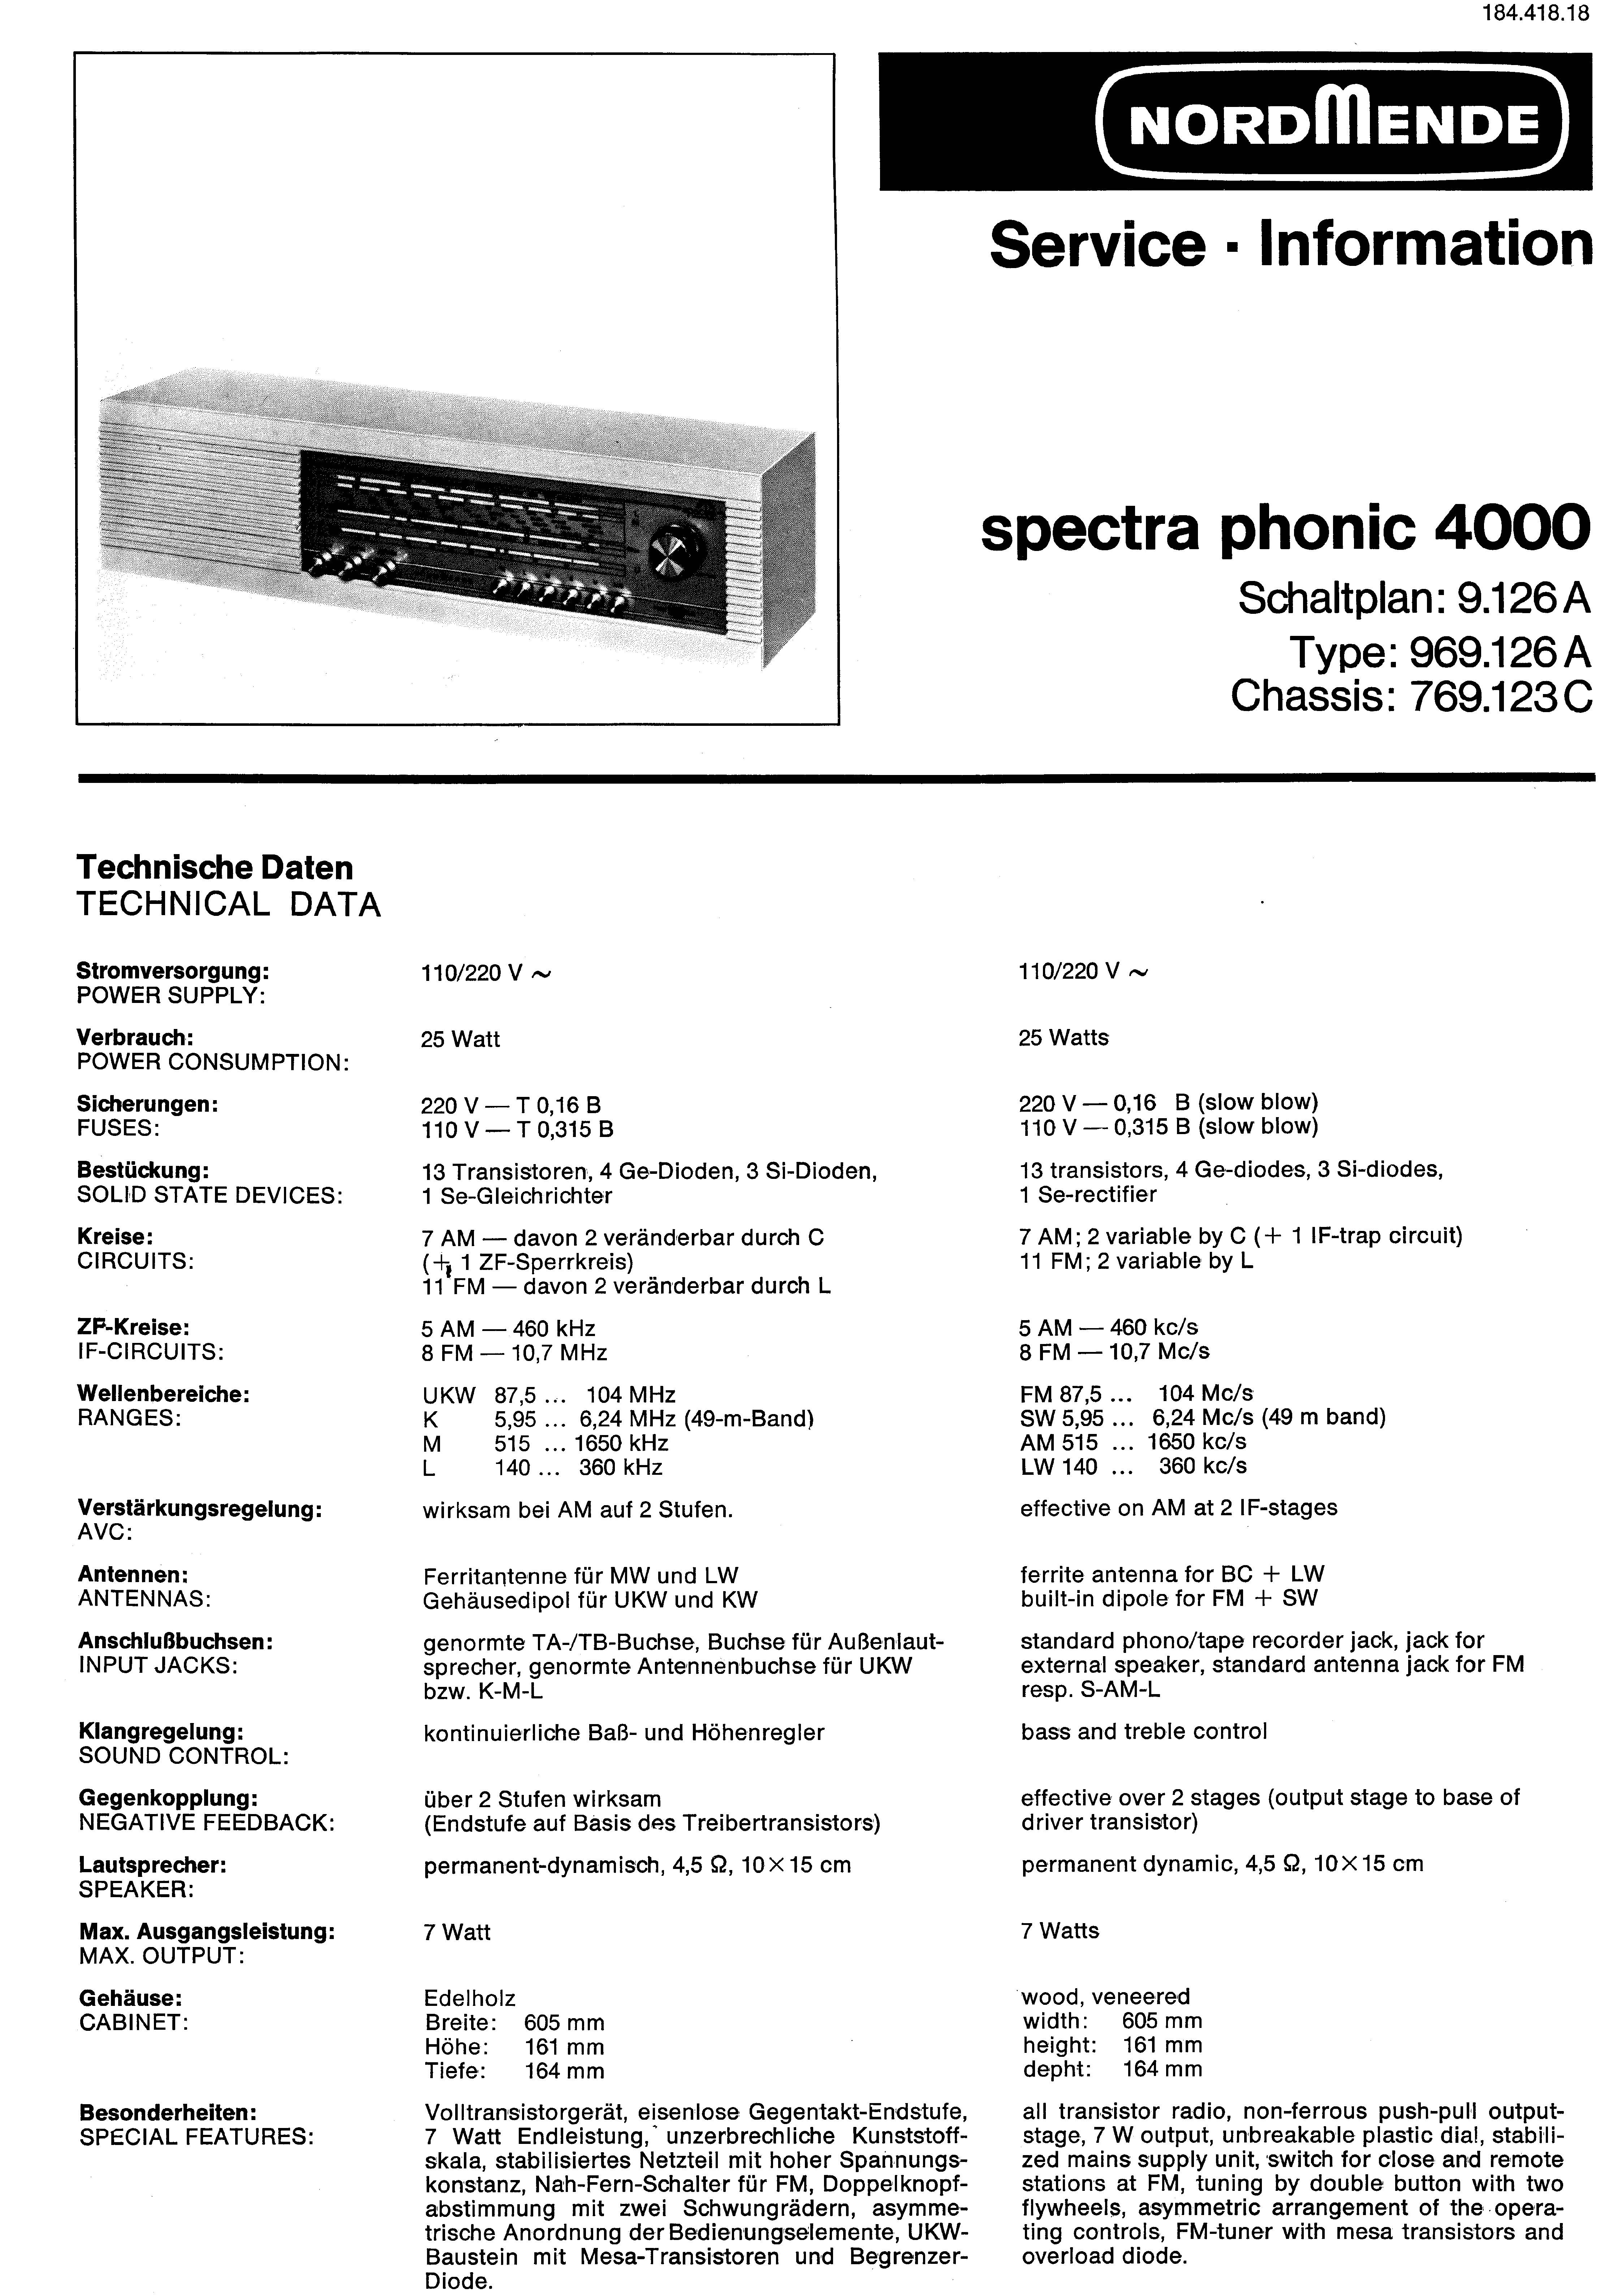 Nordmende Spectra Phonic 4000